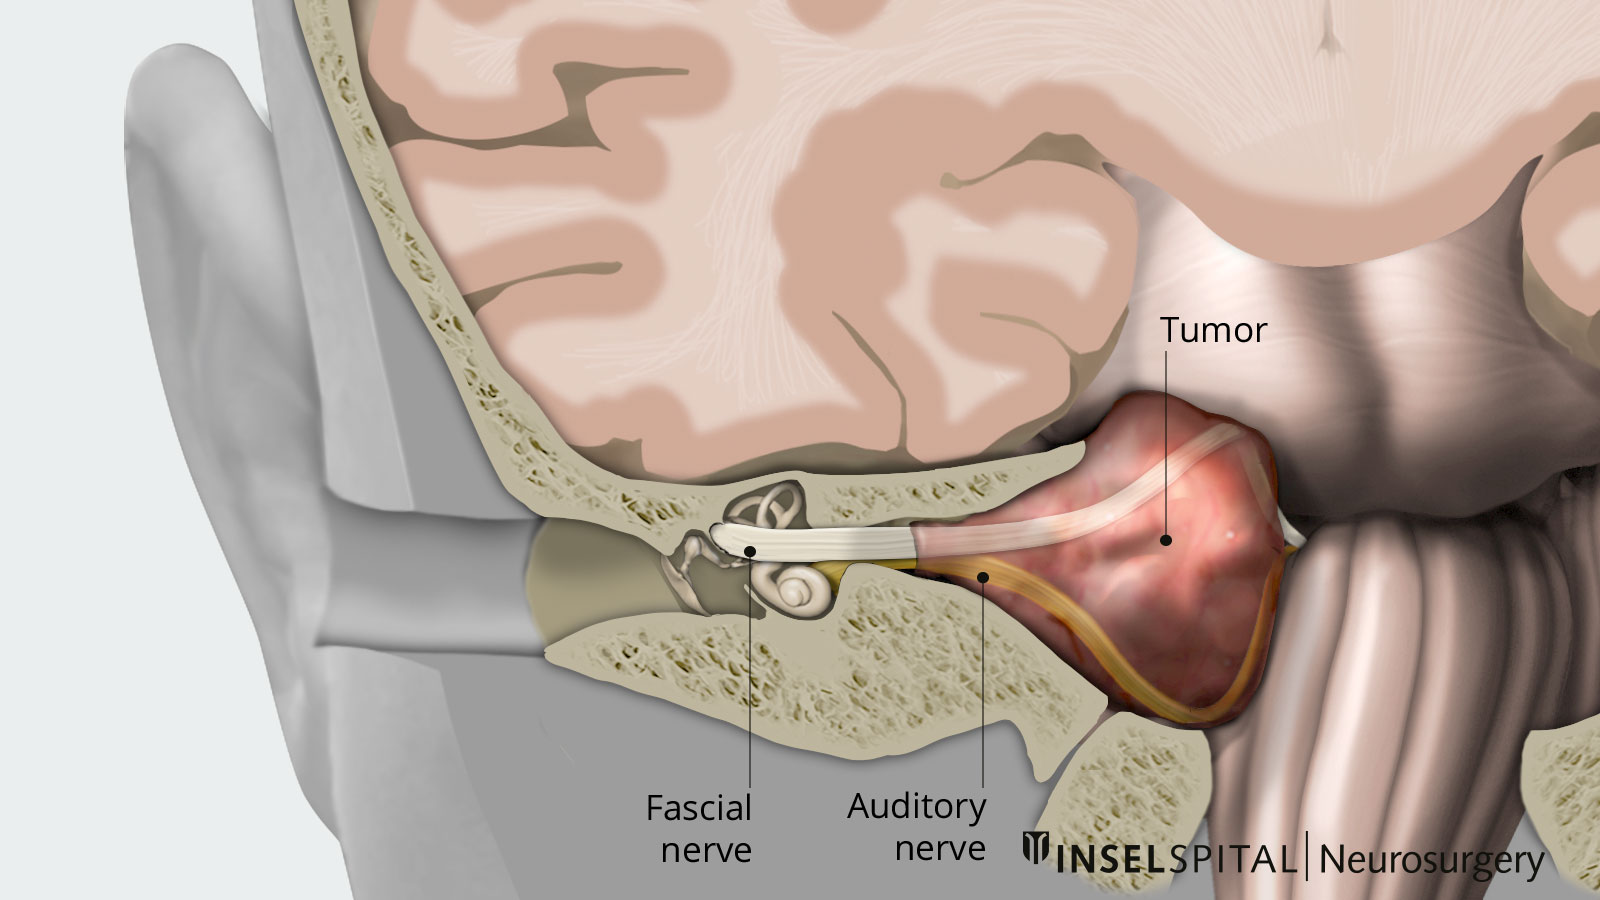 Overview drawing of the inner ear with cranial nerves and tumor